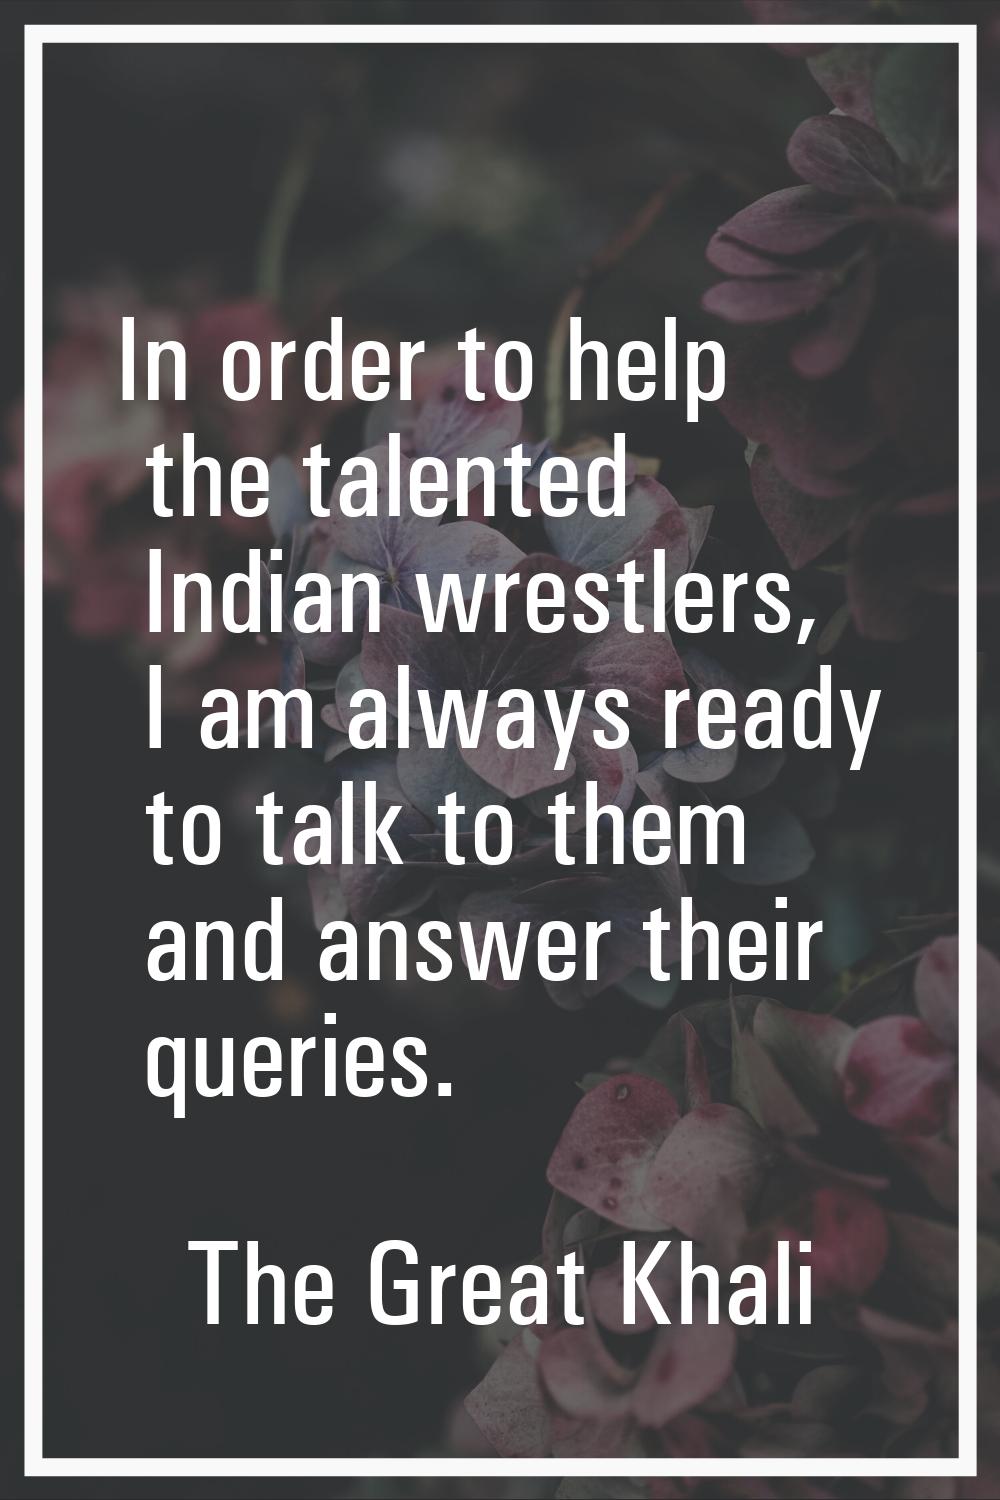 In order to help the talented Indian wrestlers, I am always ready to talk to them and answer their 